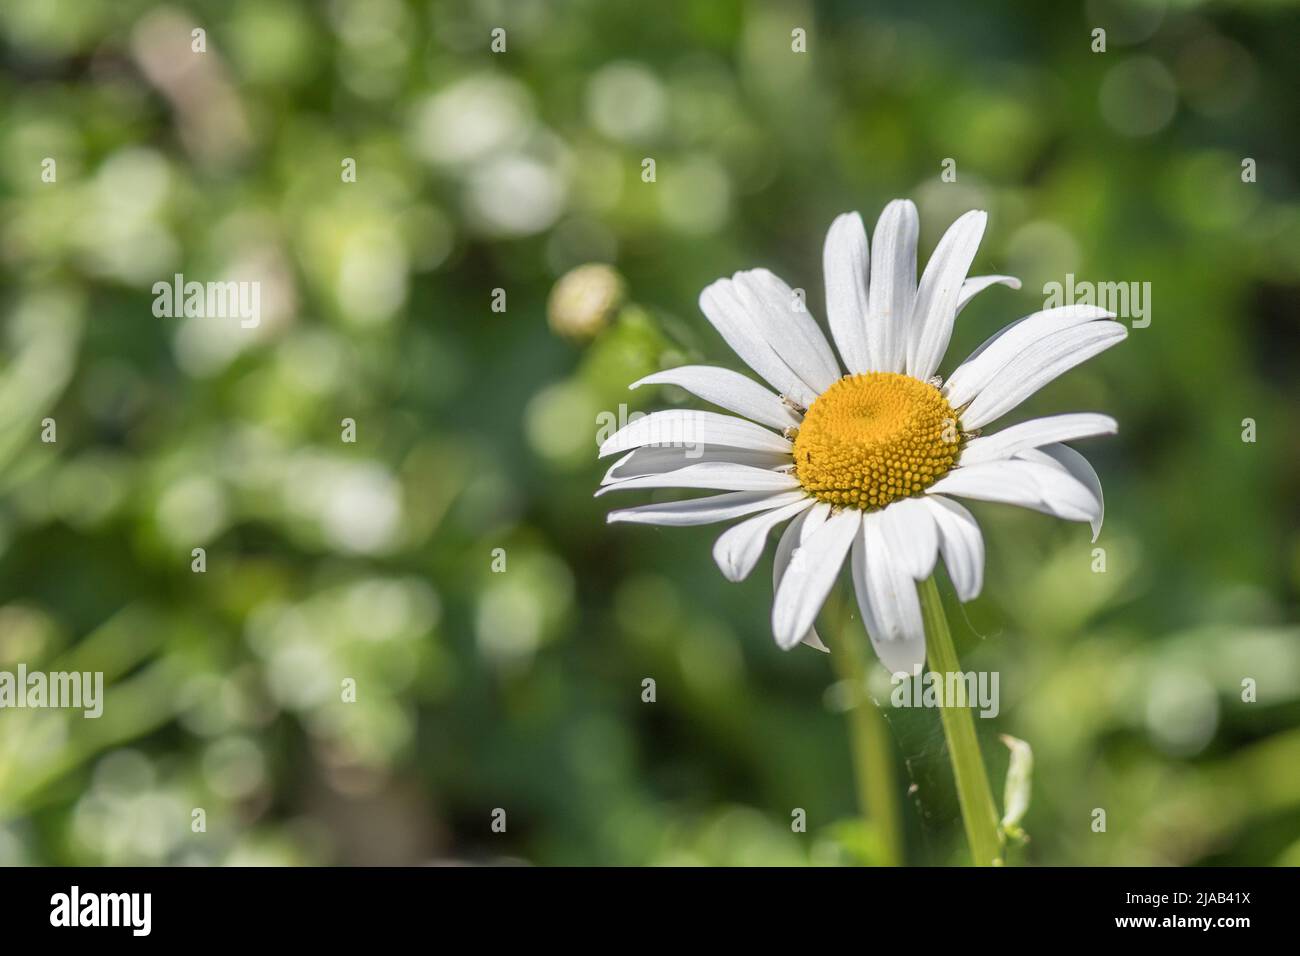 Close-up shot of single white flower of Oxeye Daisy / Leucanthemum vulgare in sunshine. Oxeye Daisy once used as medicinal plant in herbal remedies. Stock Photo